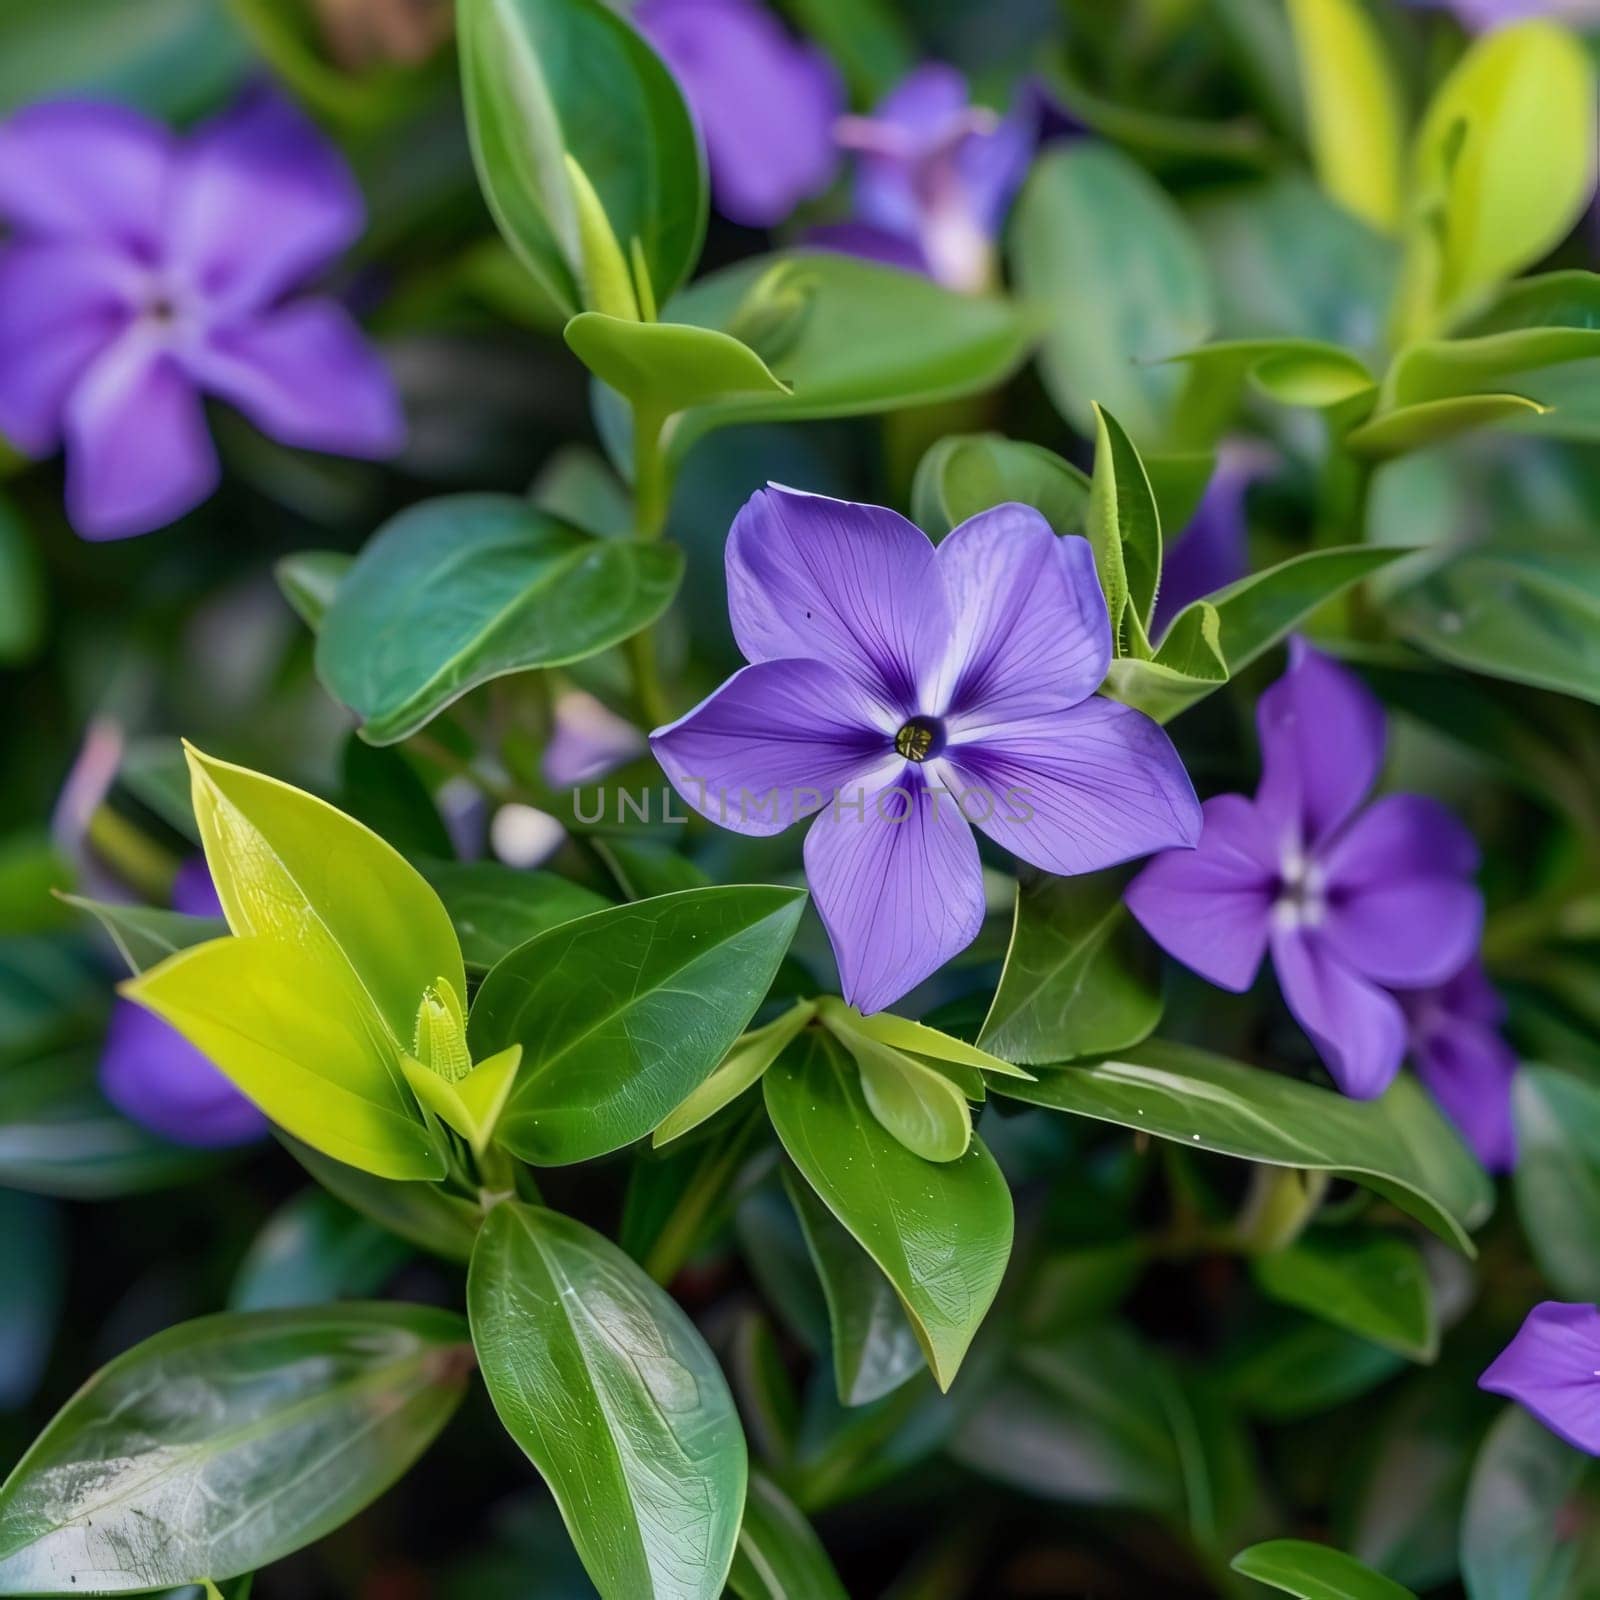 Close-up photo of purple flowers and Green Leaves. Flowering flowers, a symbol of spring, new life. A joyful time of nature awakening to life.